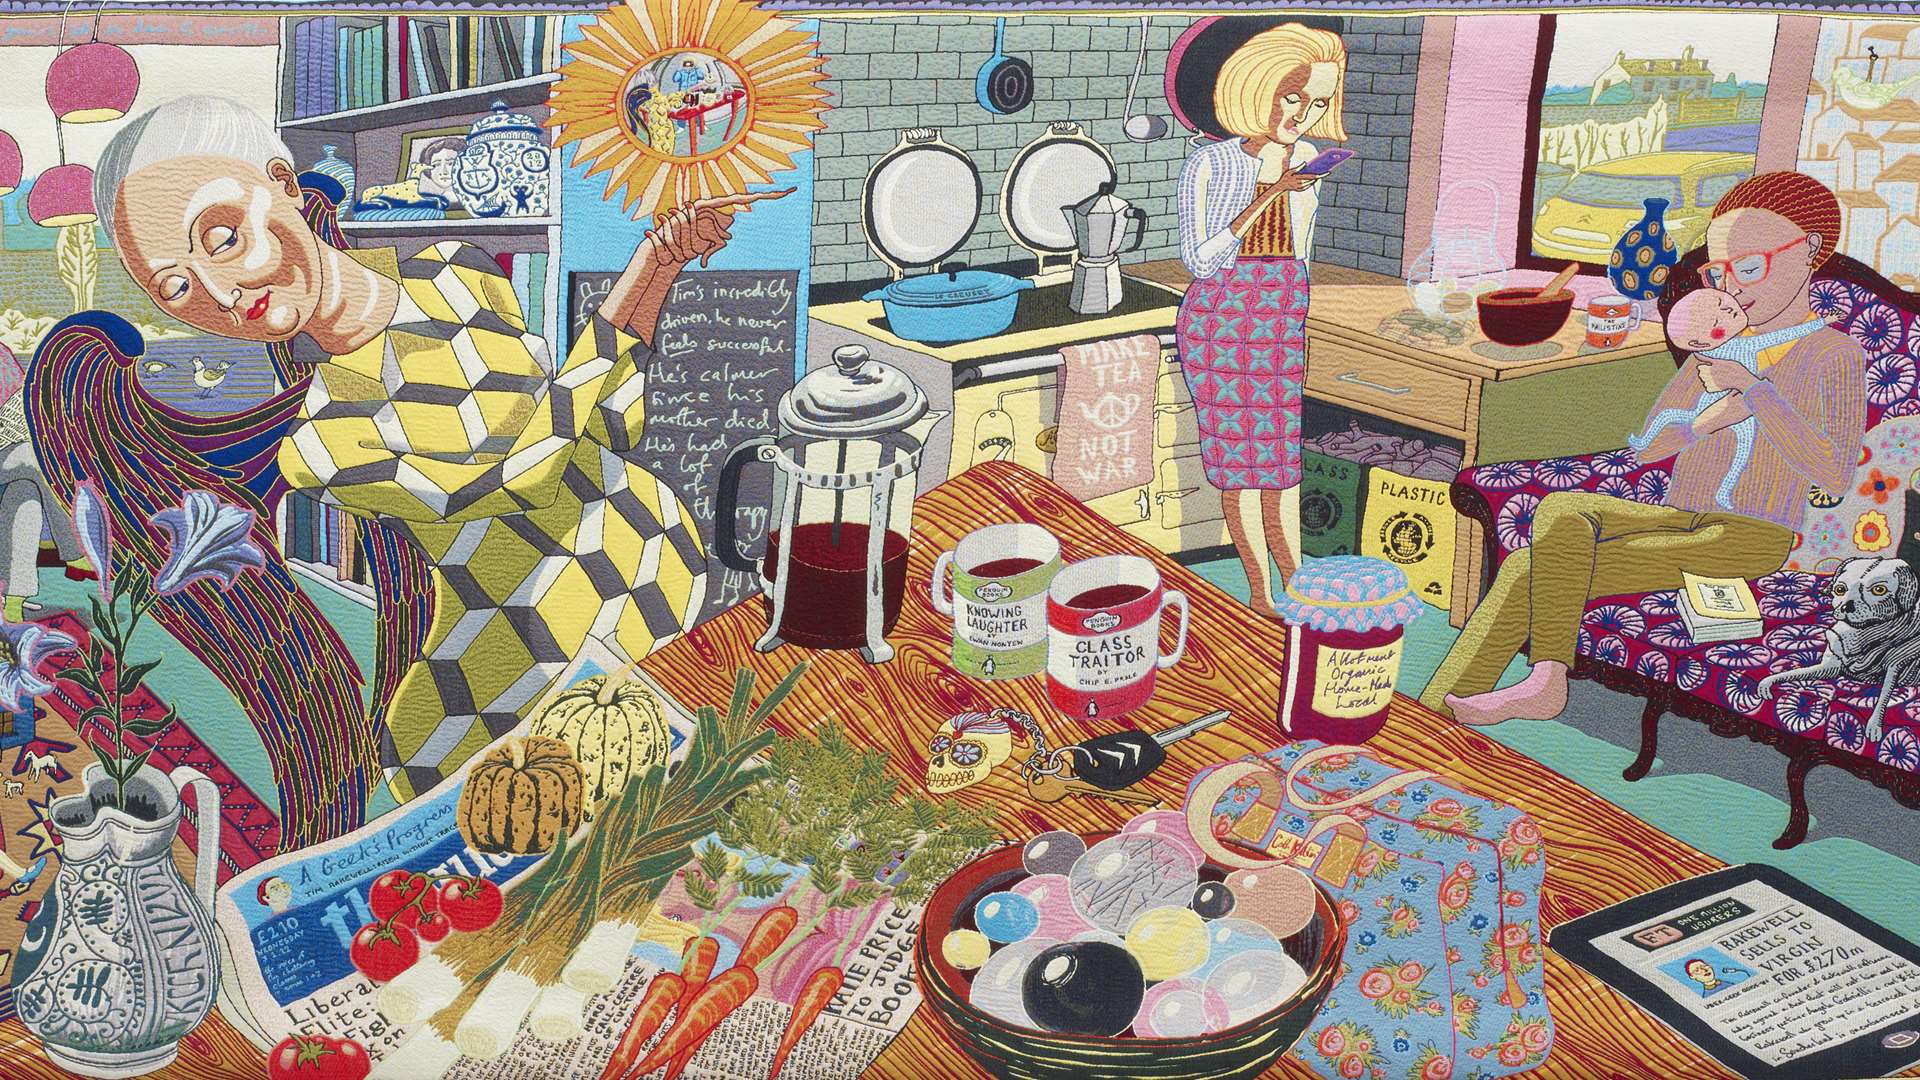 The Annunciation of the Virgin deal, Grayson Perry 2012